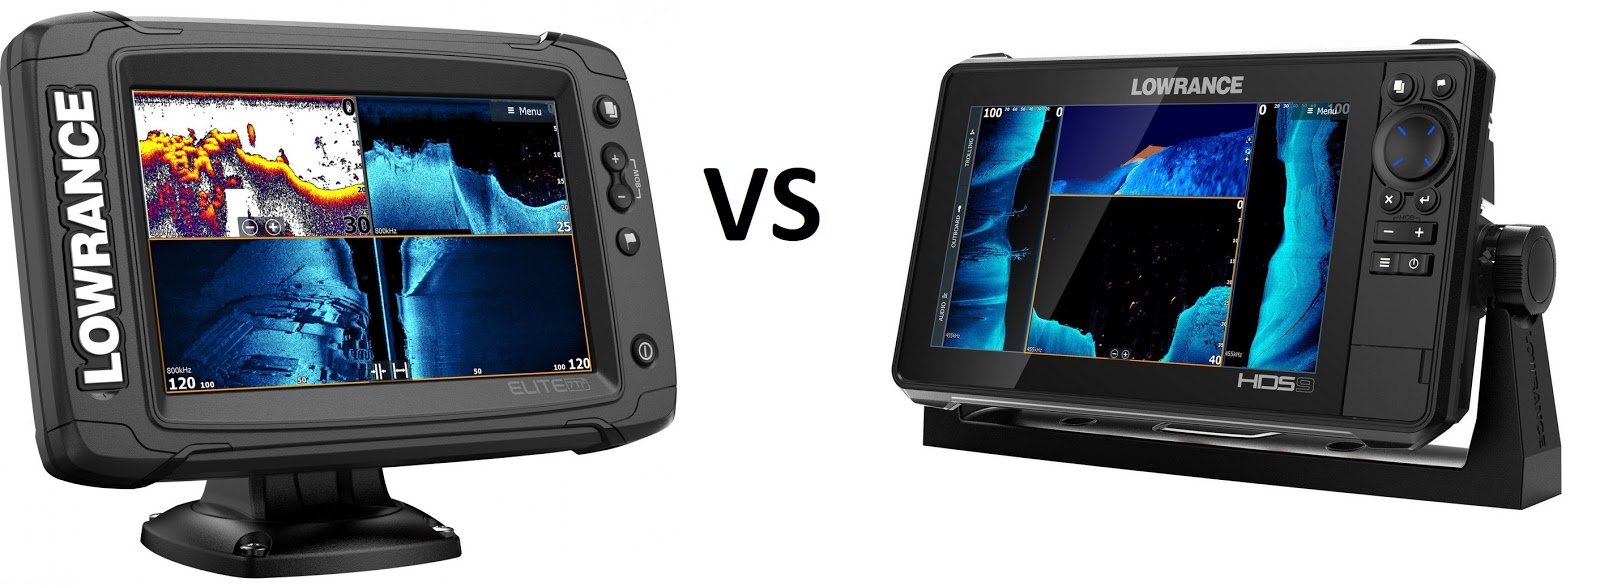 What is the difference between Lowrance HDS Live and Elite Ti2?